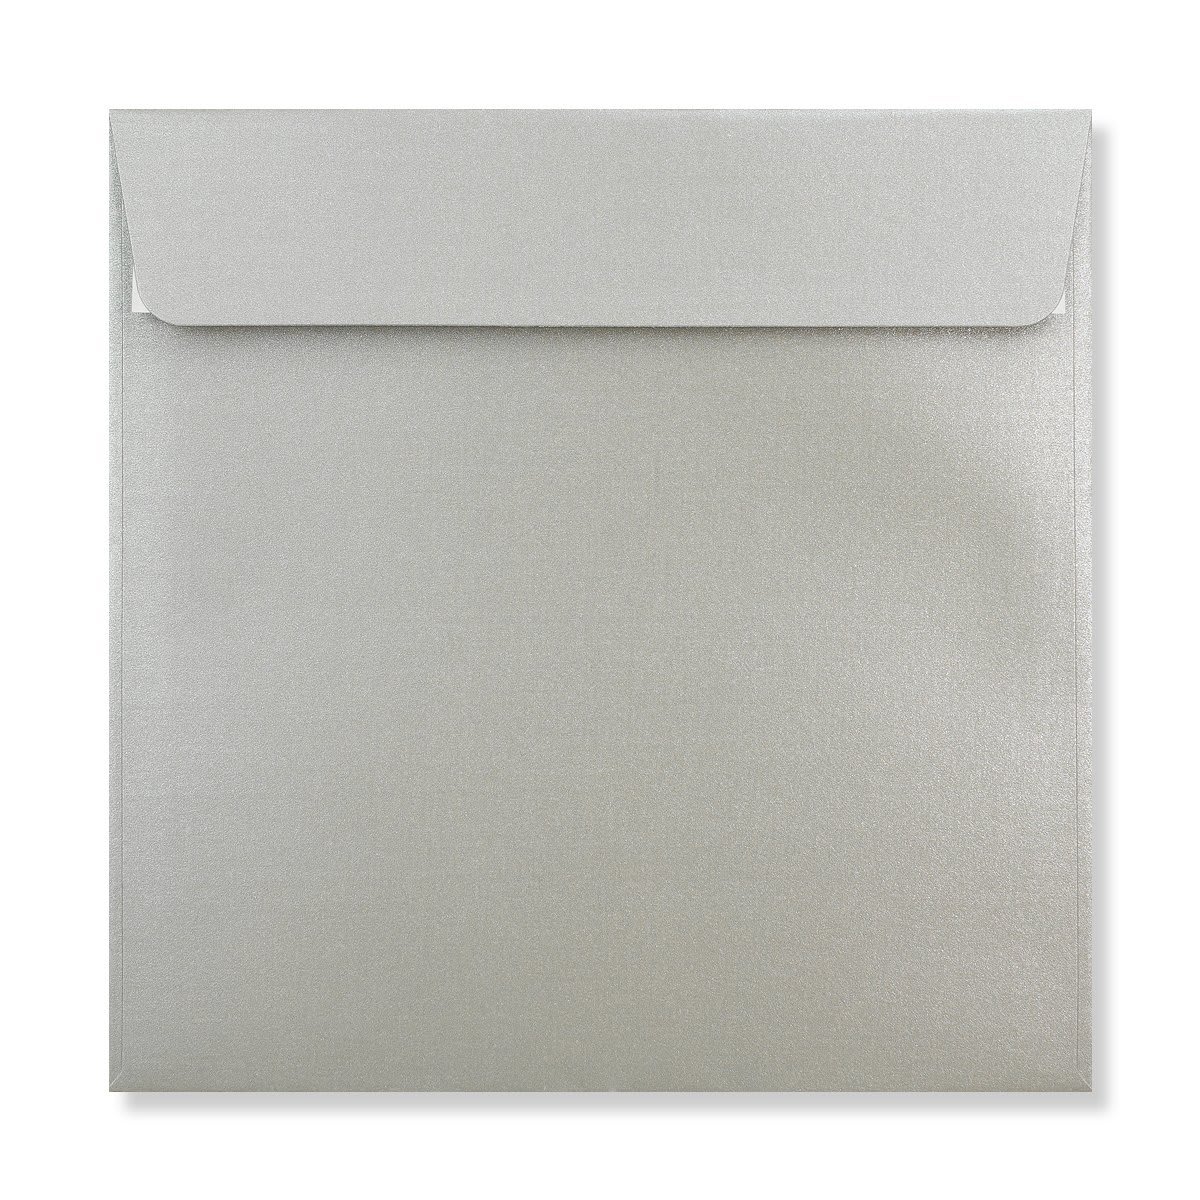 170x170mm Silver Pearlescent Peel & Seal 120gsm  Envelopes